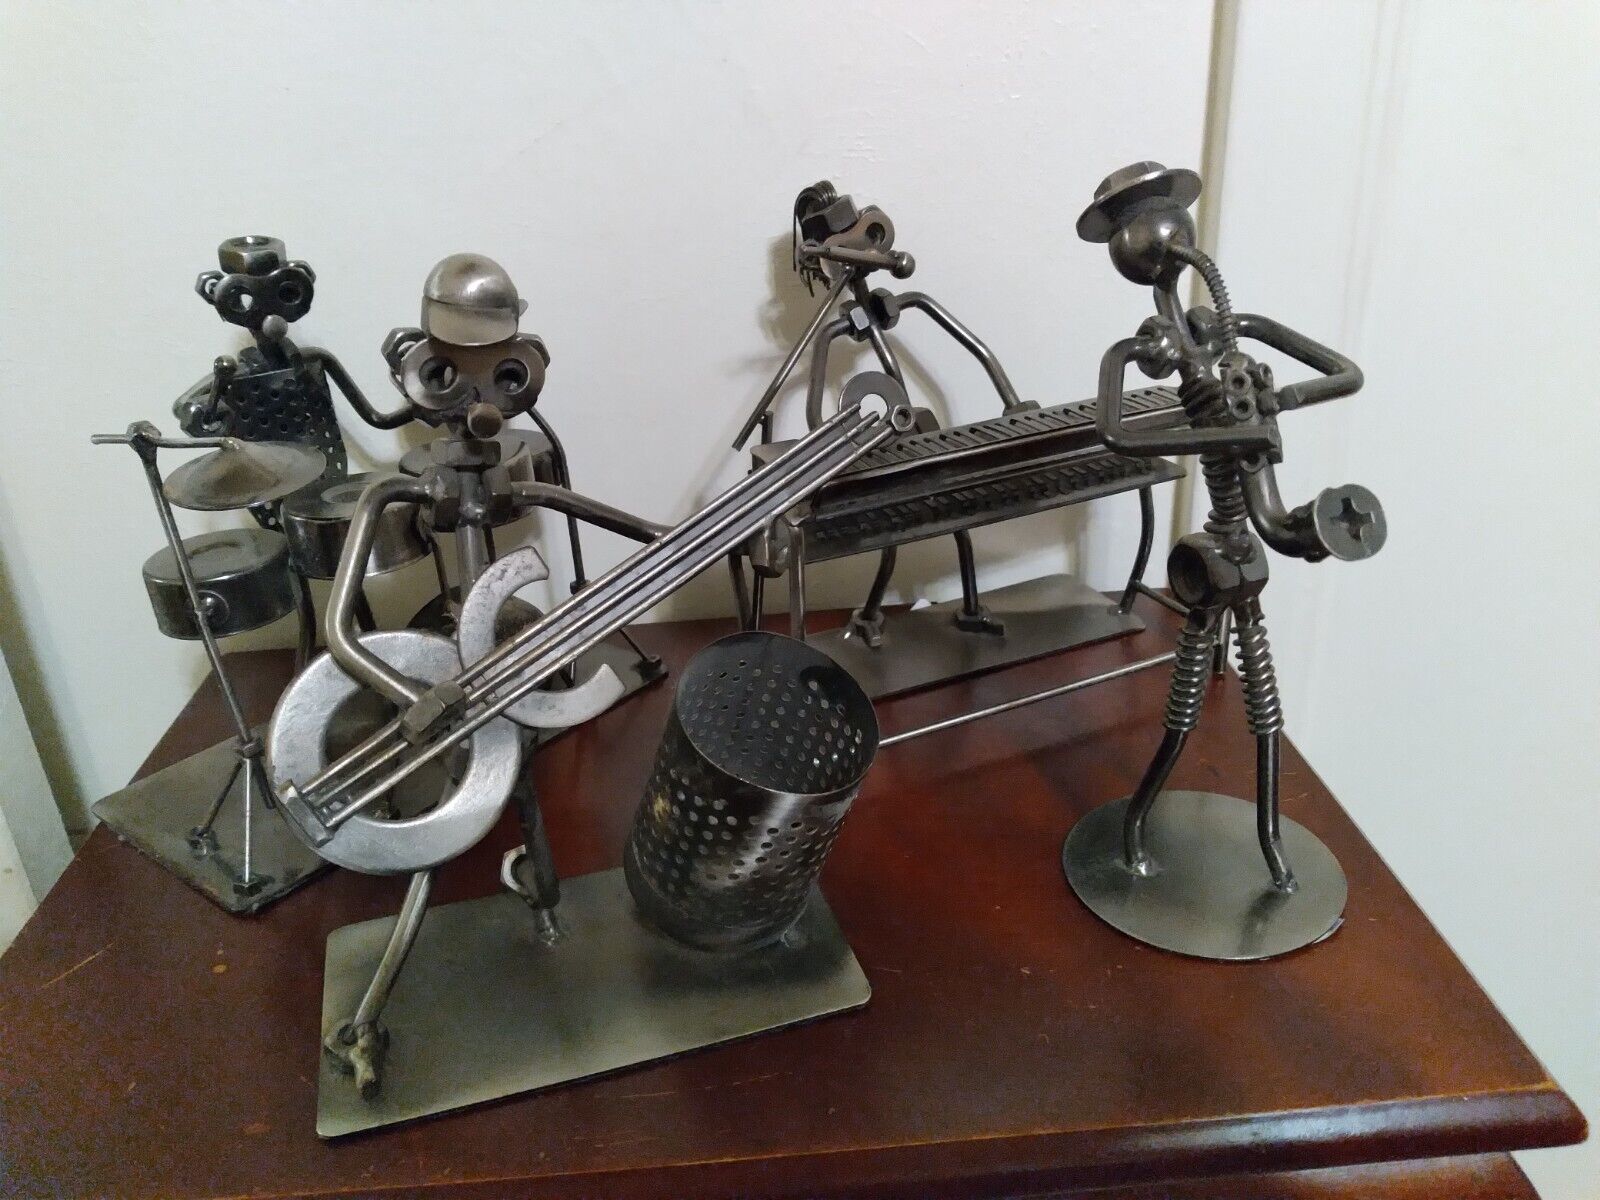 Art, mts, Nuts And Bolts Jazz Band Sculpture Set Of 4, Sax, keyboard, drums base